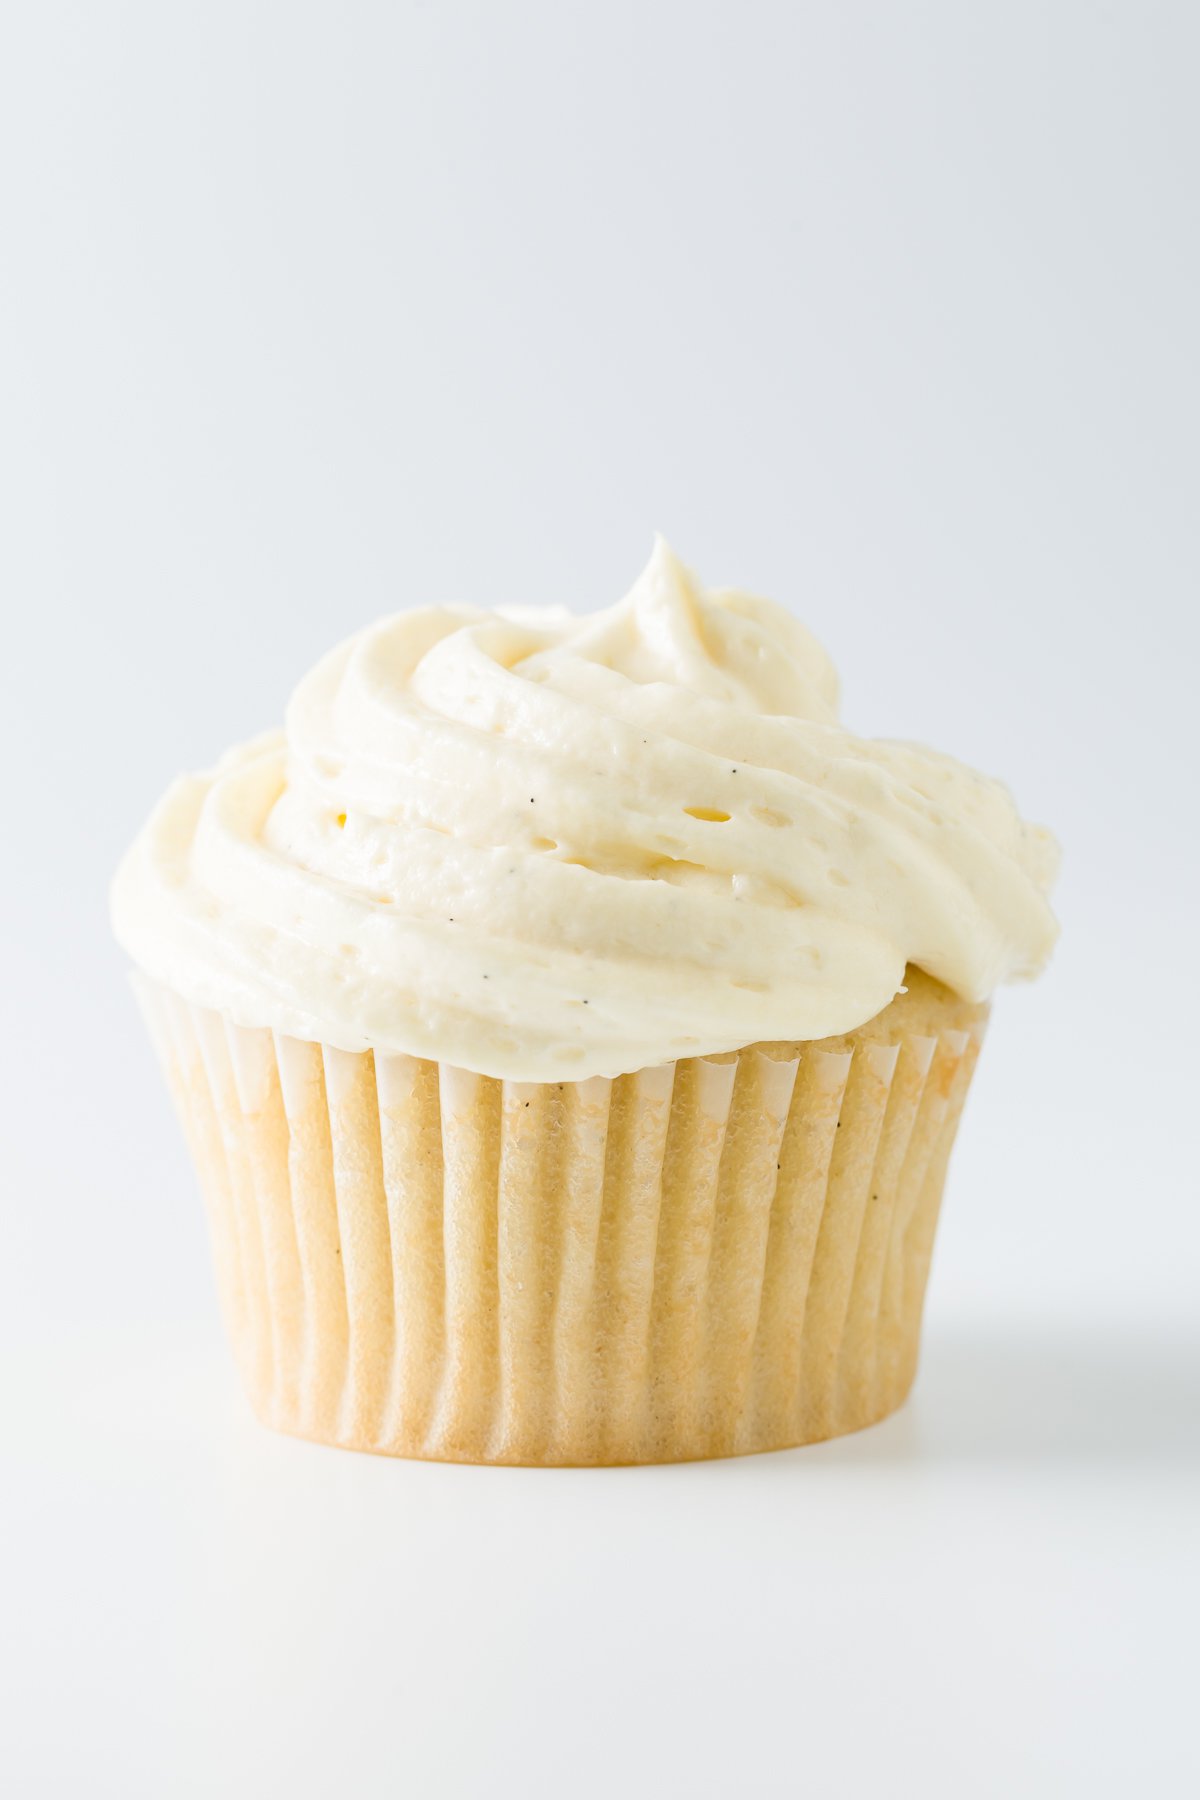 Best Vanilla Cupcakes Recipe - Step-by-Step Instructions and Video